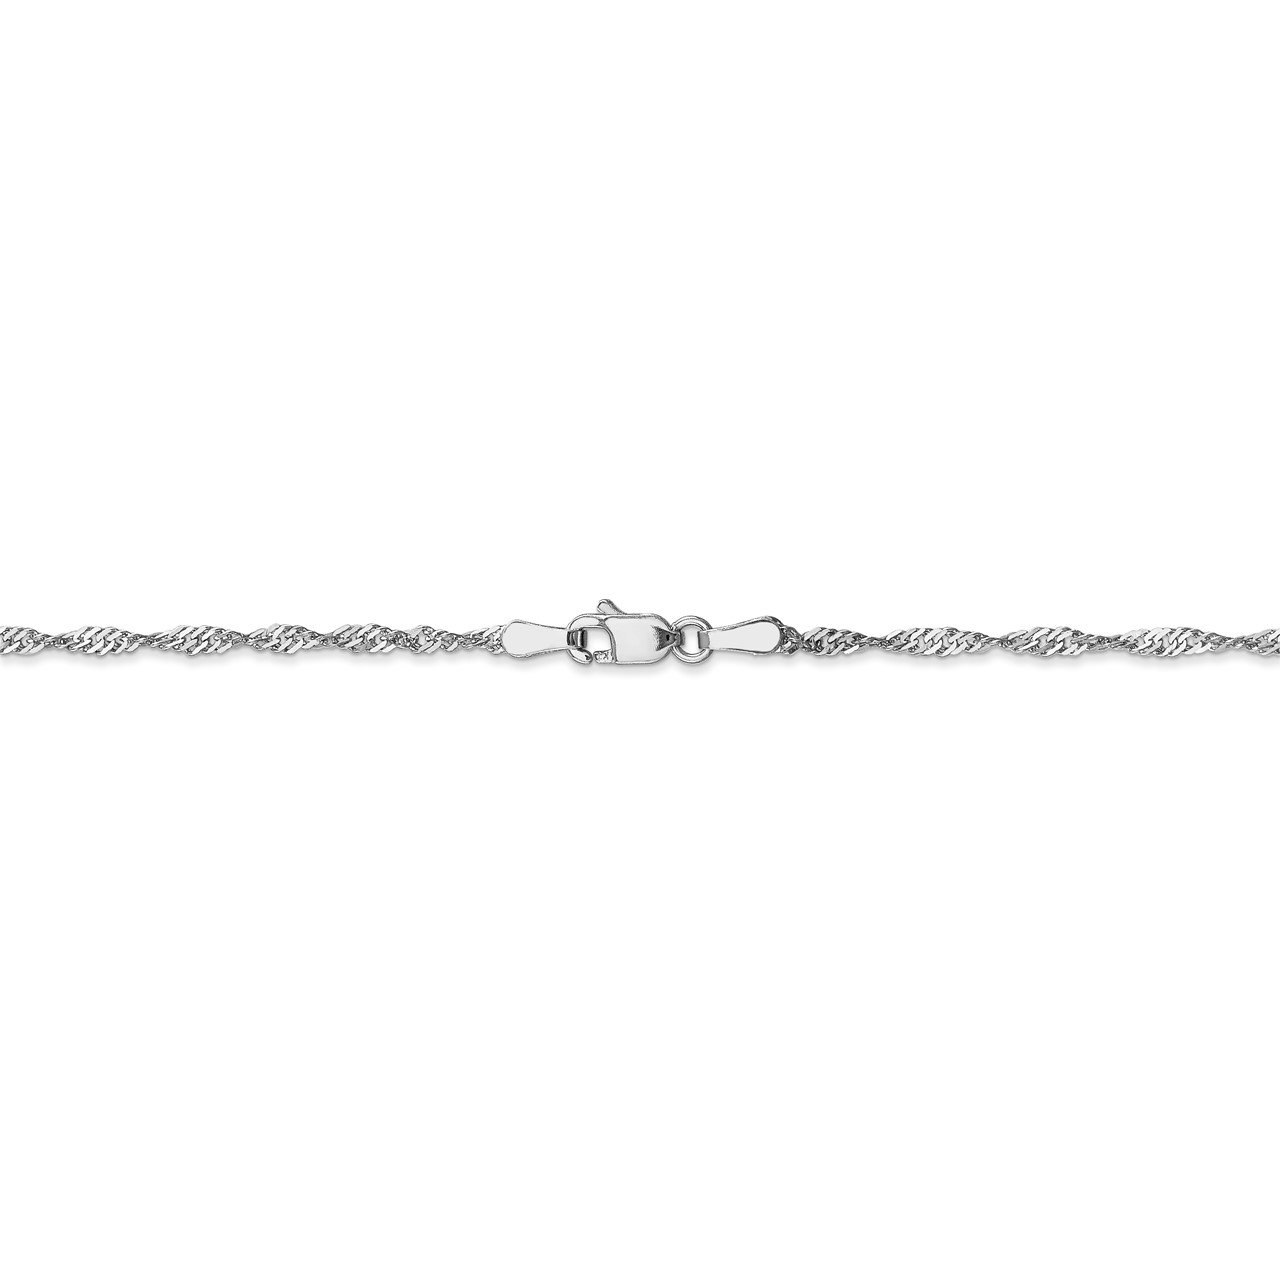 Leslie's 14K White Gold Singapore with Lock Chain-2